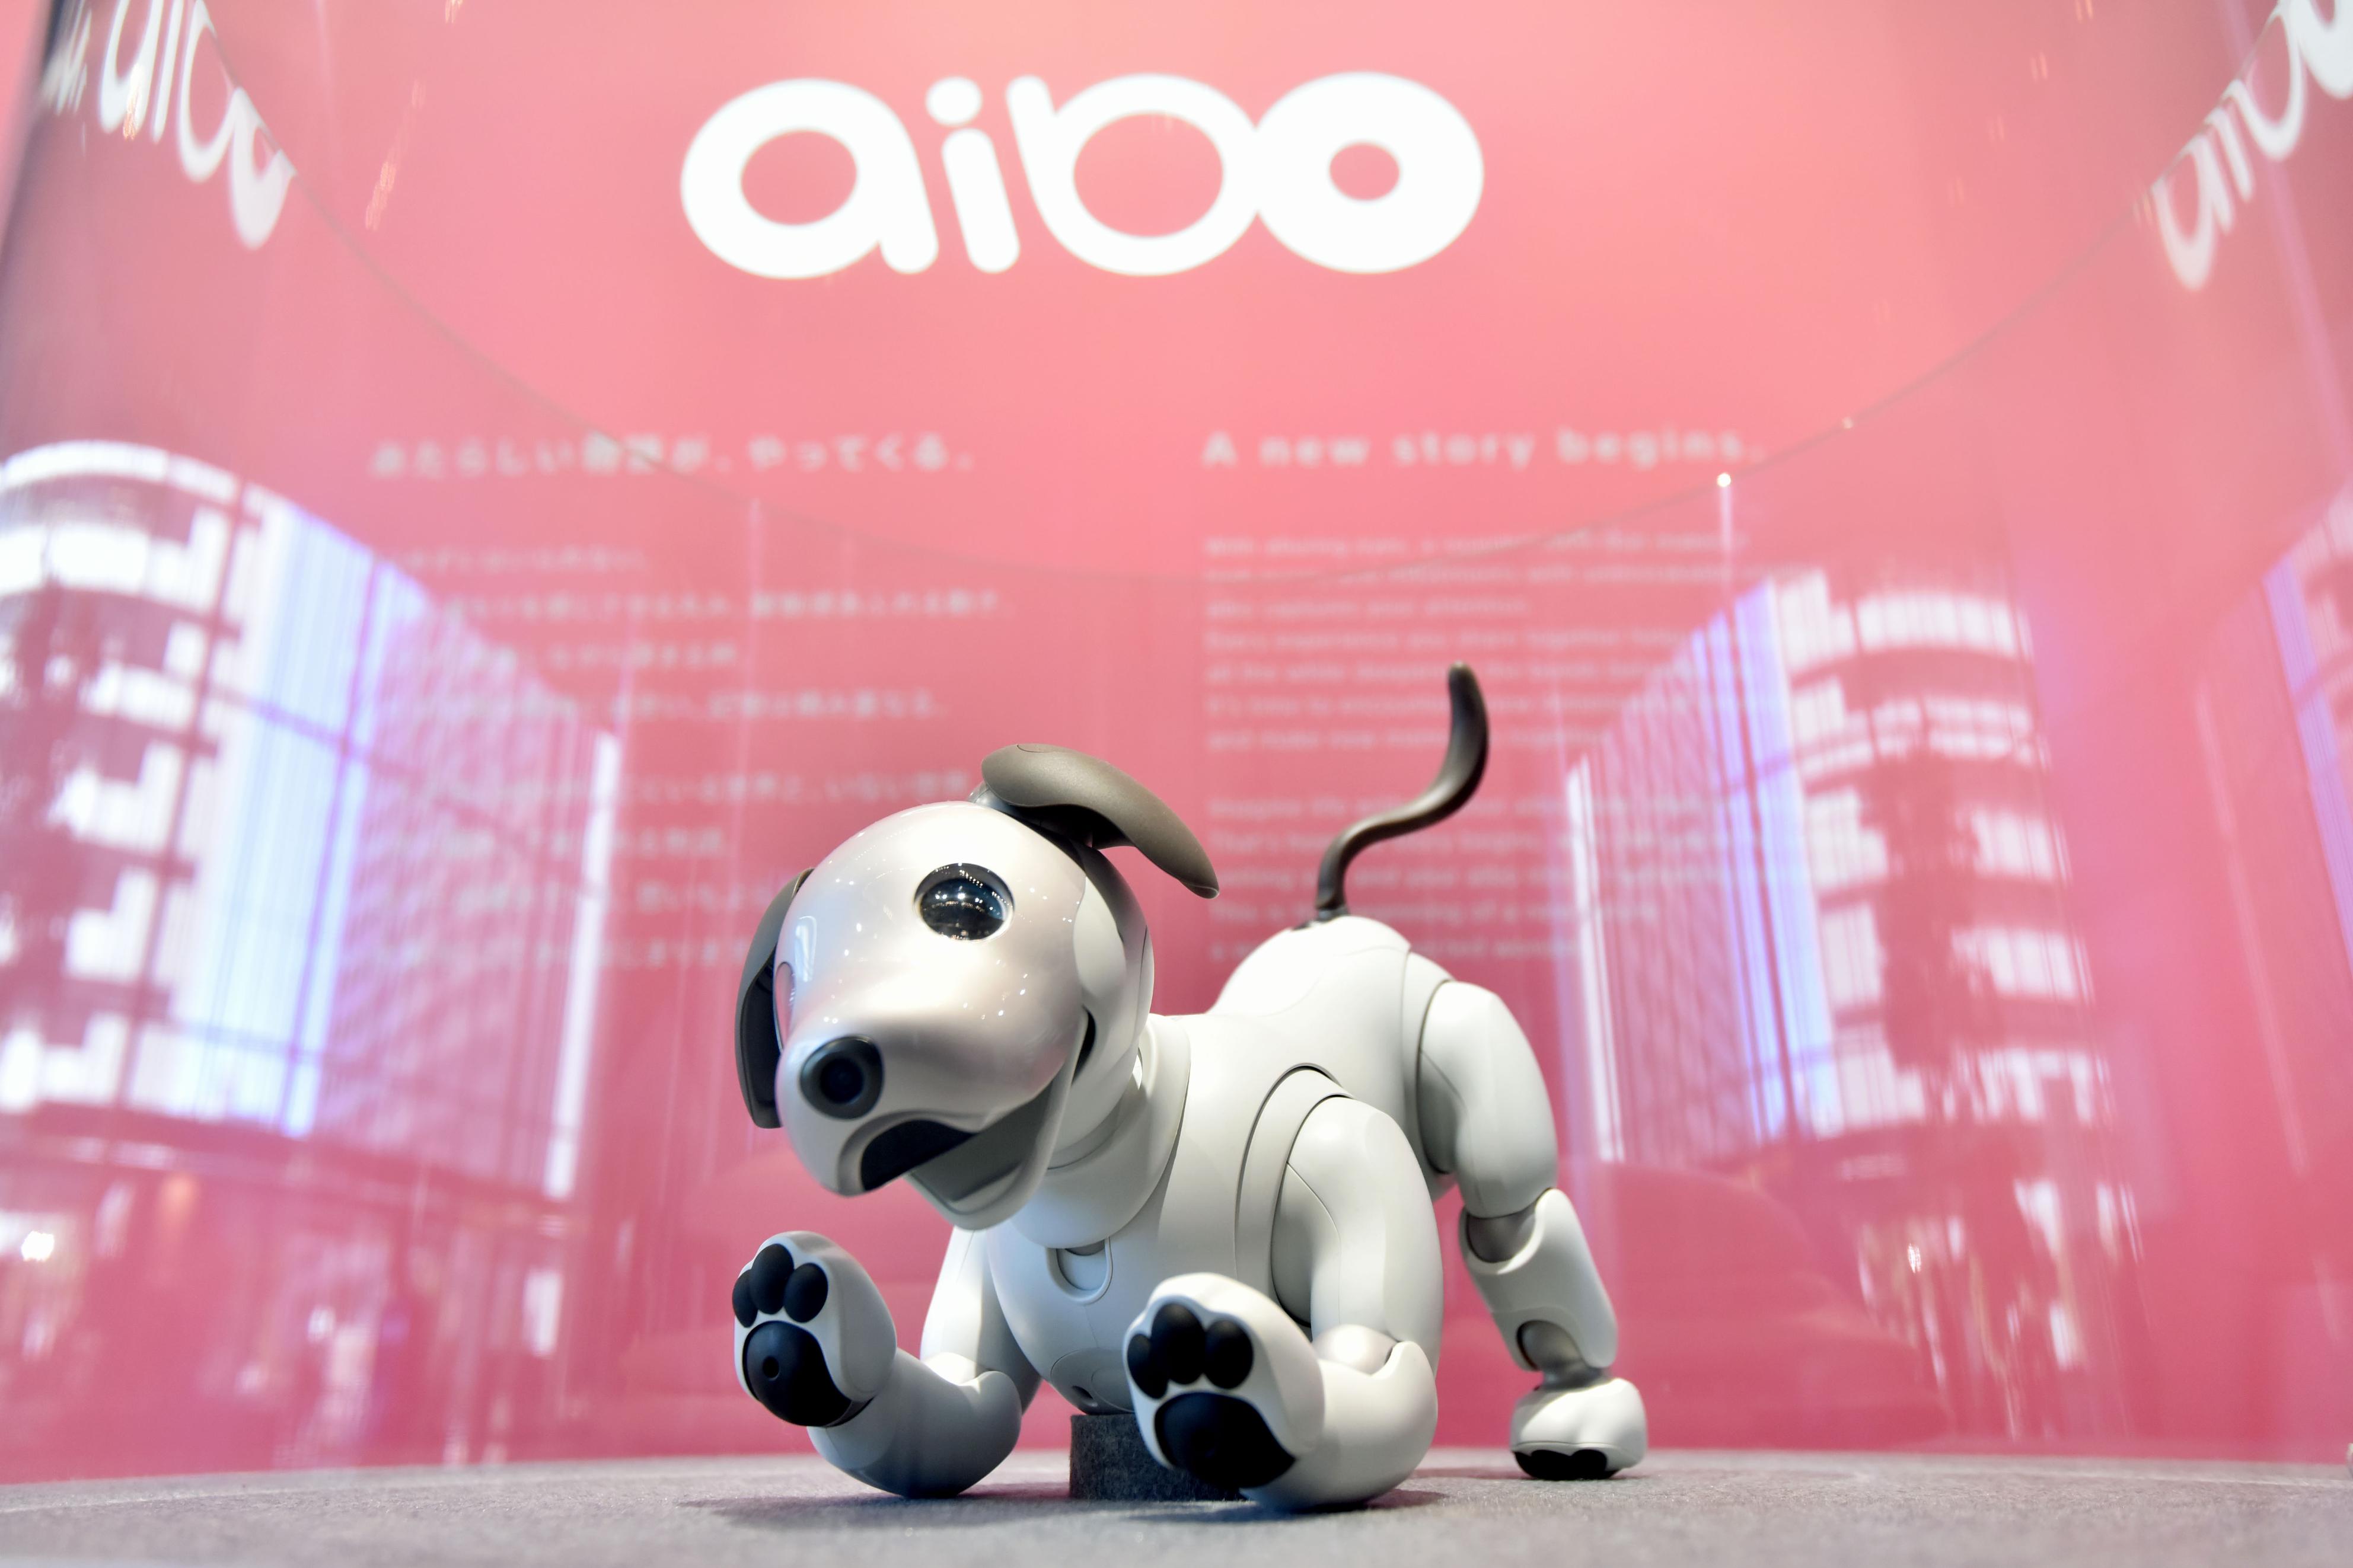 'aibo' Customers in New Age of Robot Companions | JAPAN Forward